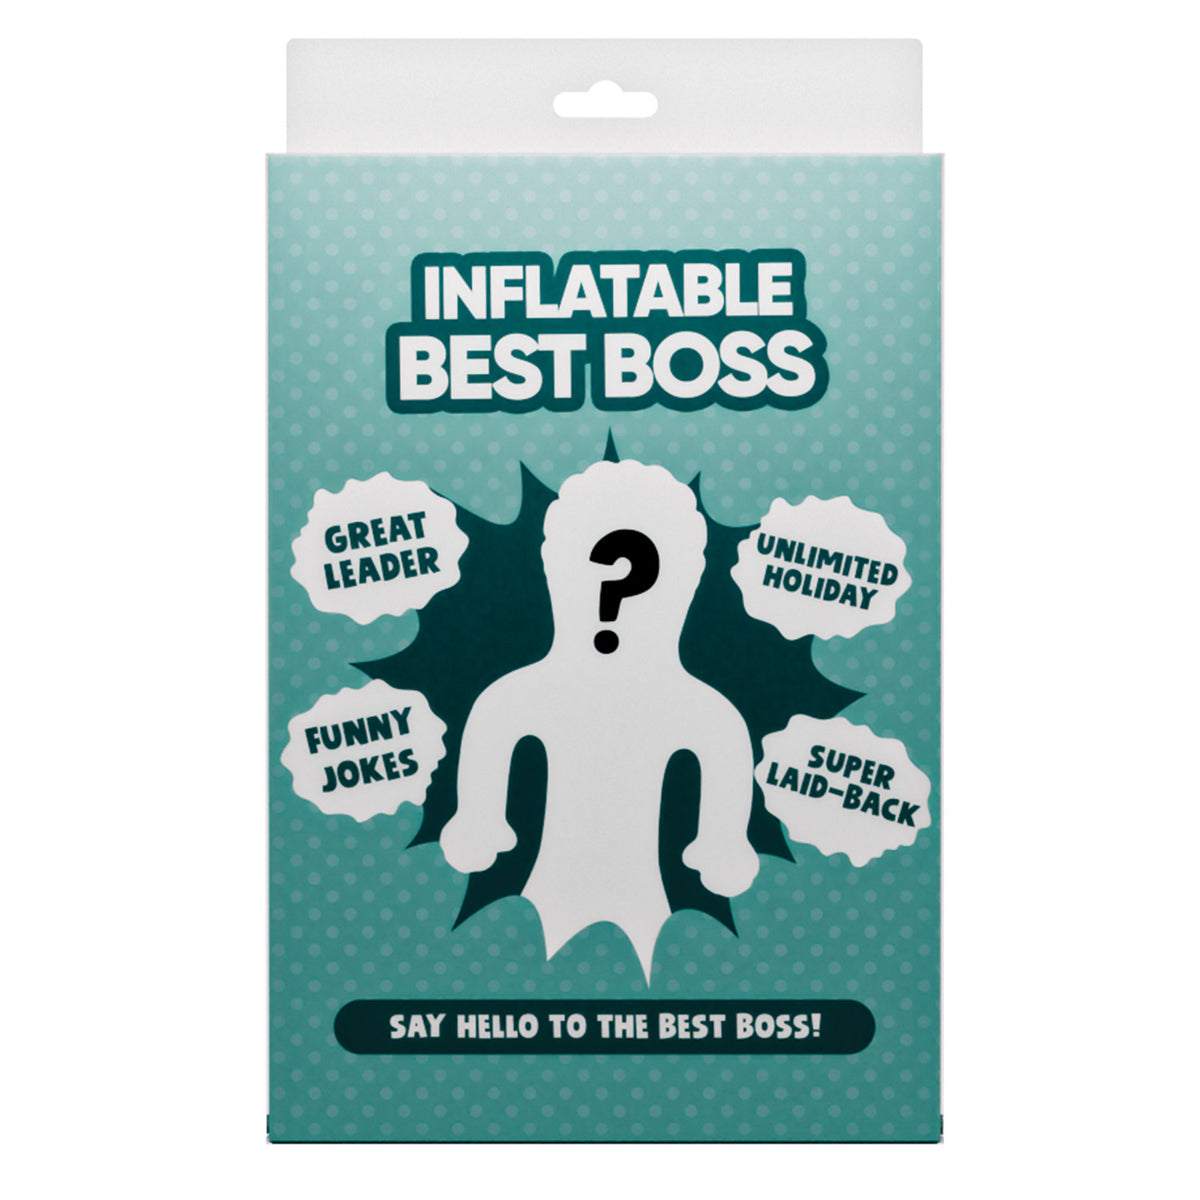 Inflatable Best Boss Box